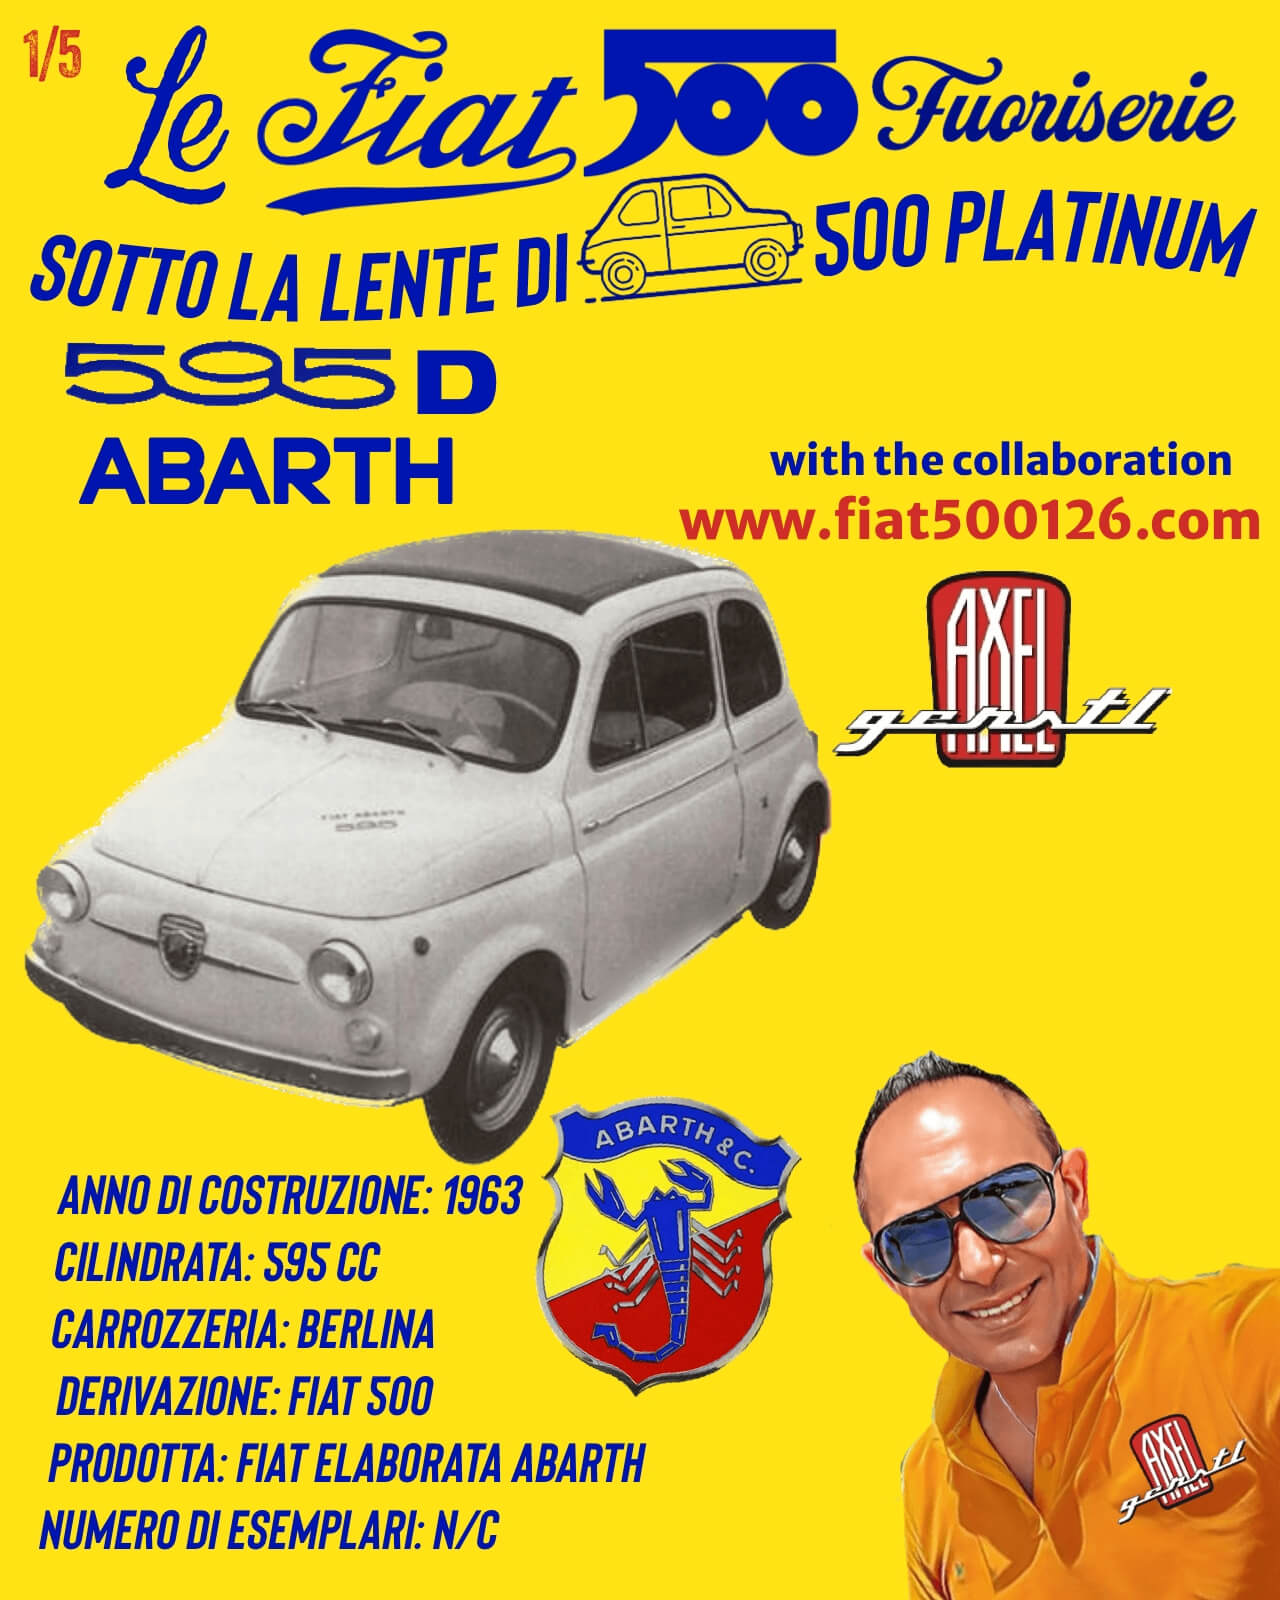 Davide puts the spot on: The Abarth 595 